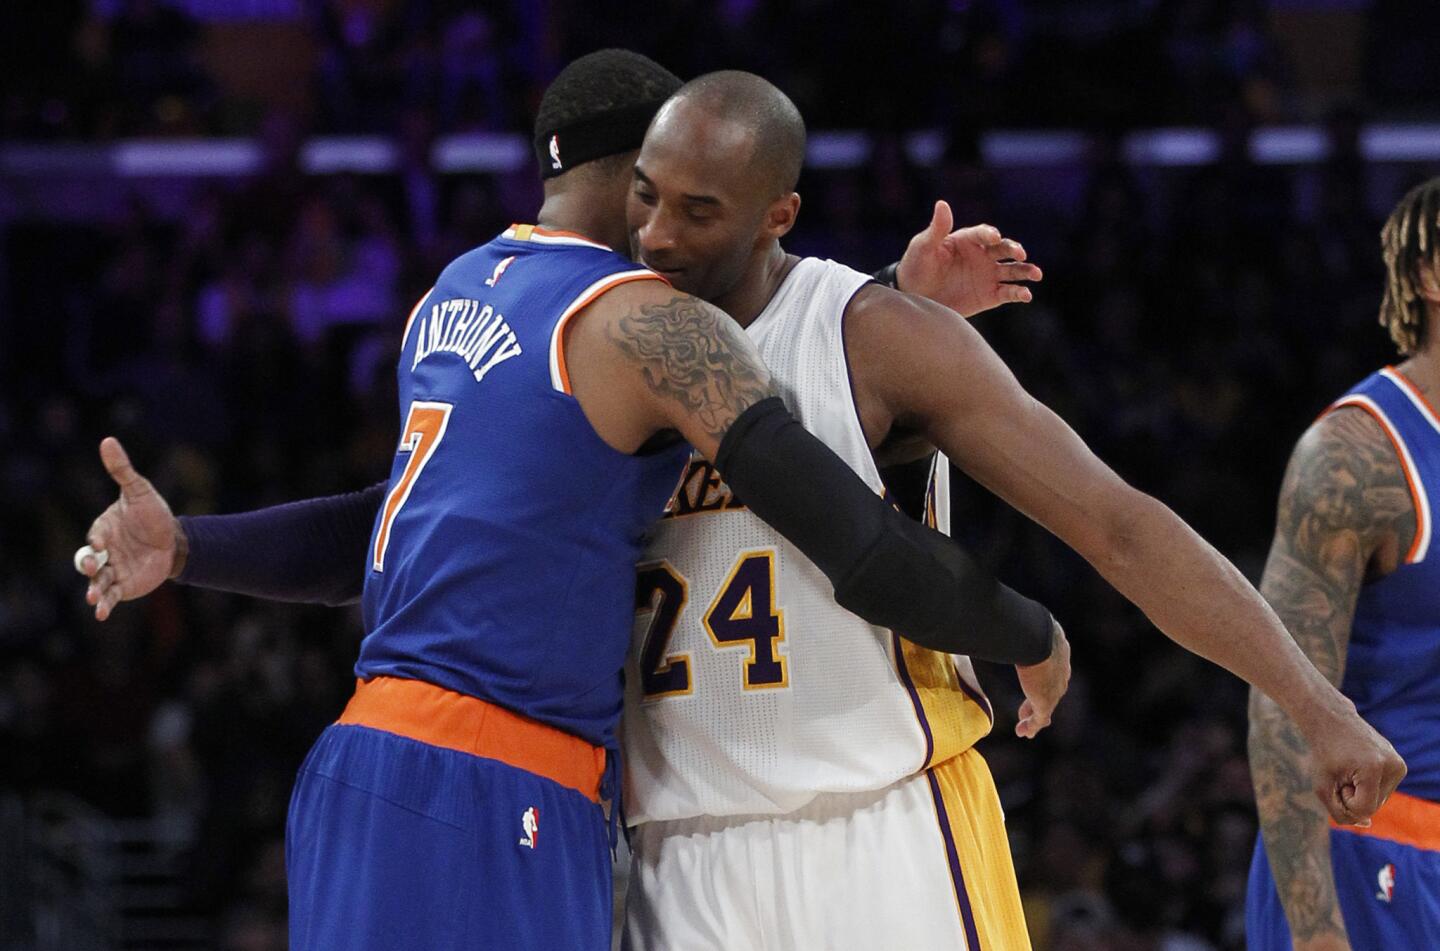 Knicks forward Carmelo Anthony (7) hugs Lakers forward Kobe Bryant (24) prior to their game Sunday at Staples Center.